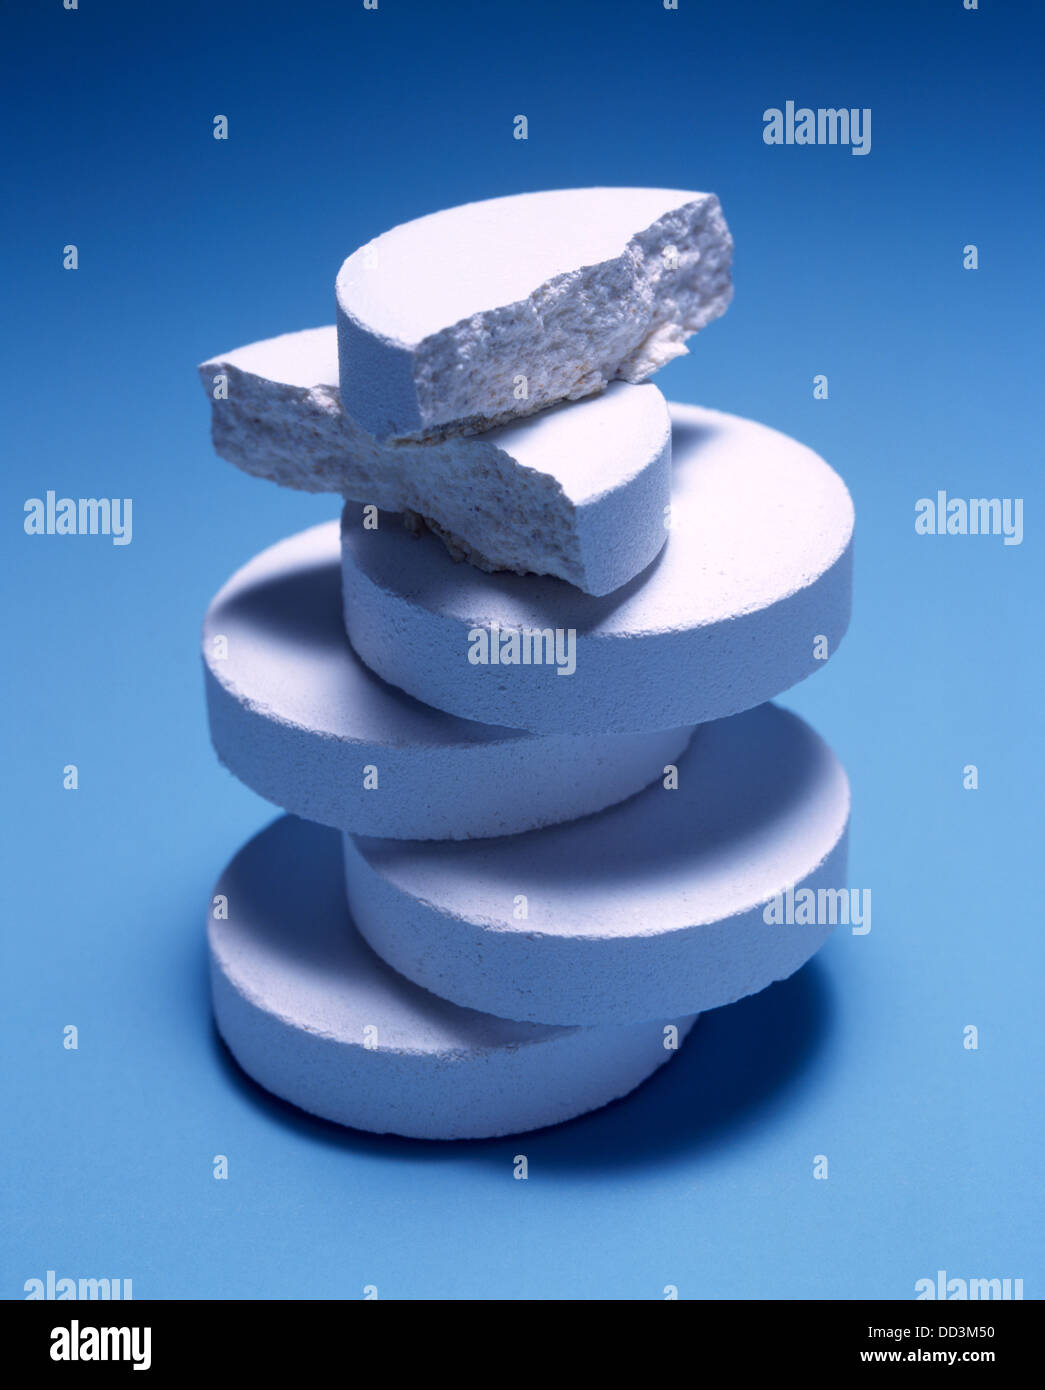 A large stack of white medicine tablets on a blue background. Stock Photo